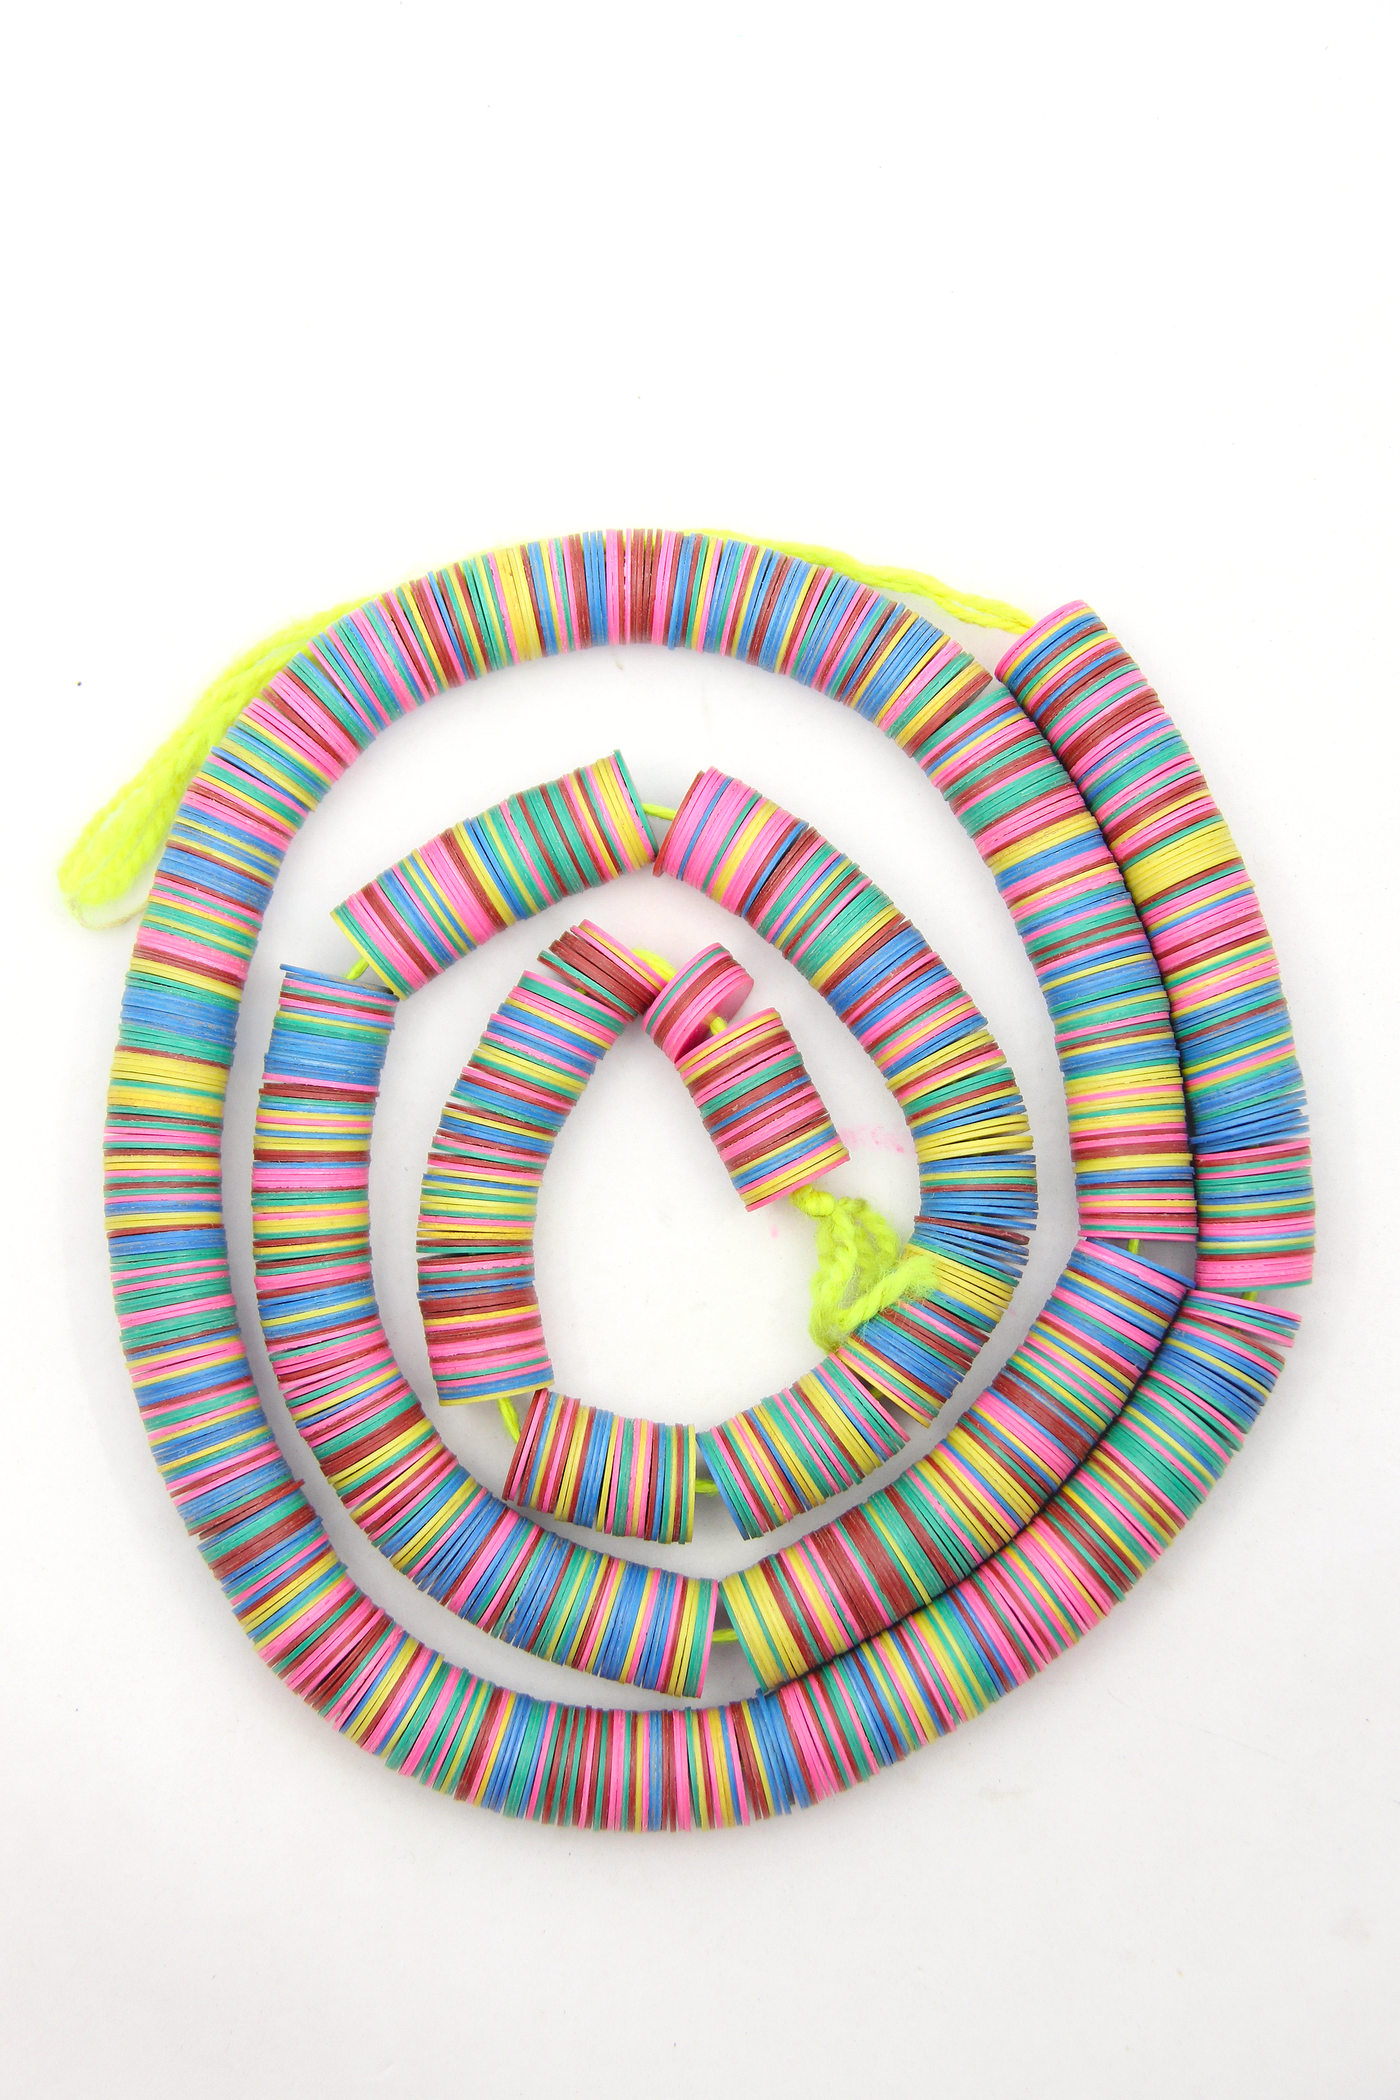 14mm Multi Color African Vinyl Record Beads, Authentic Waist Beads